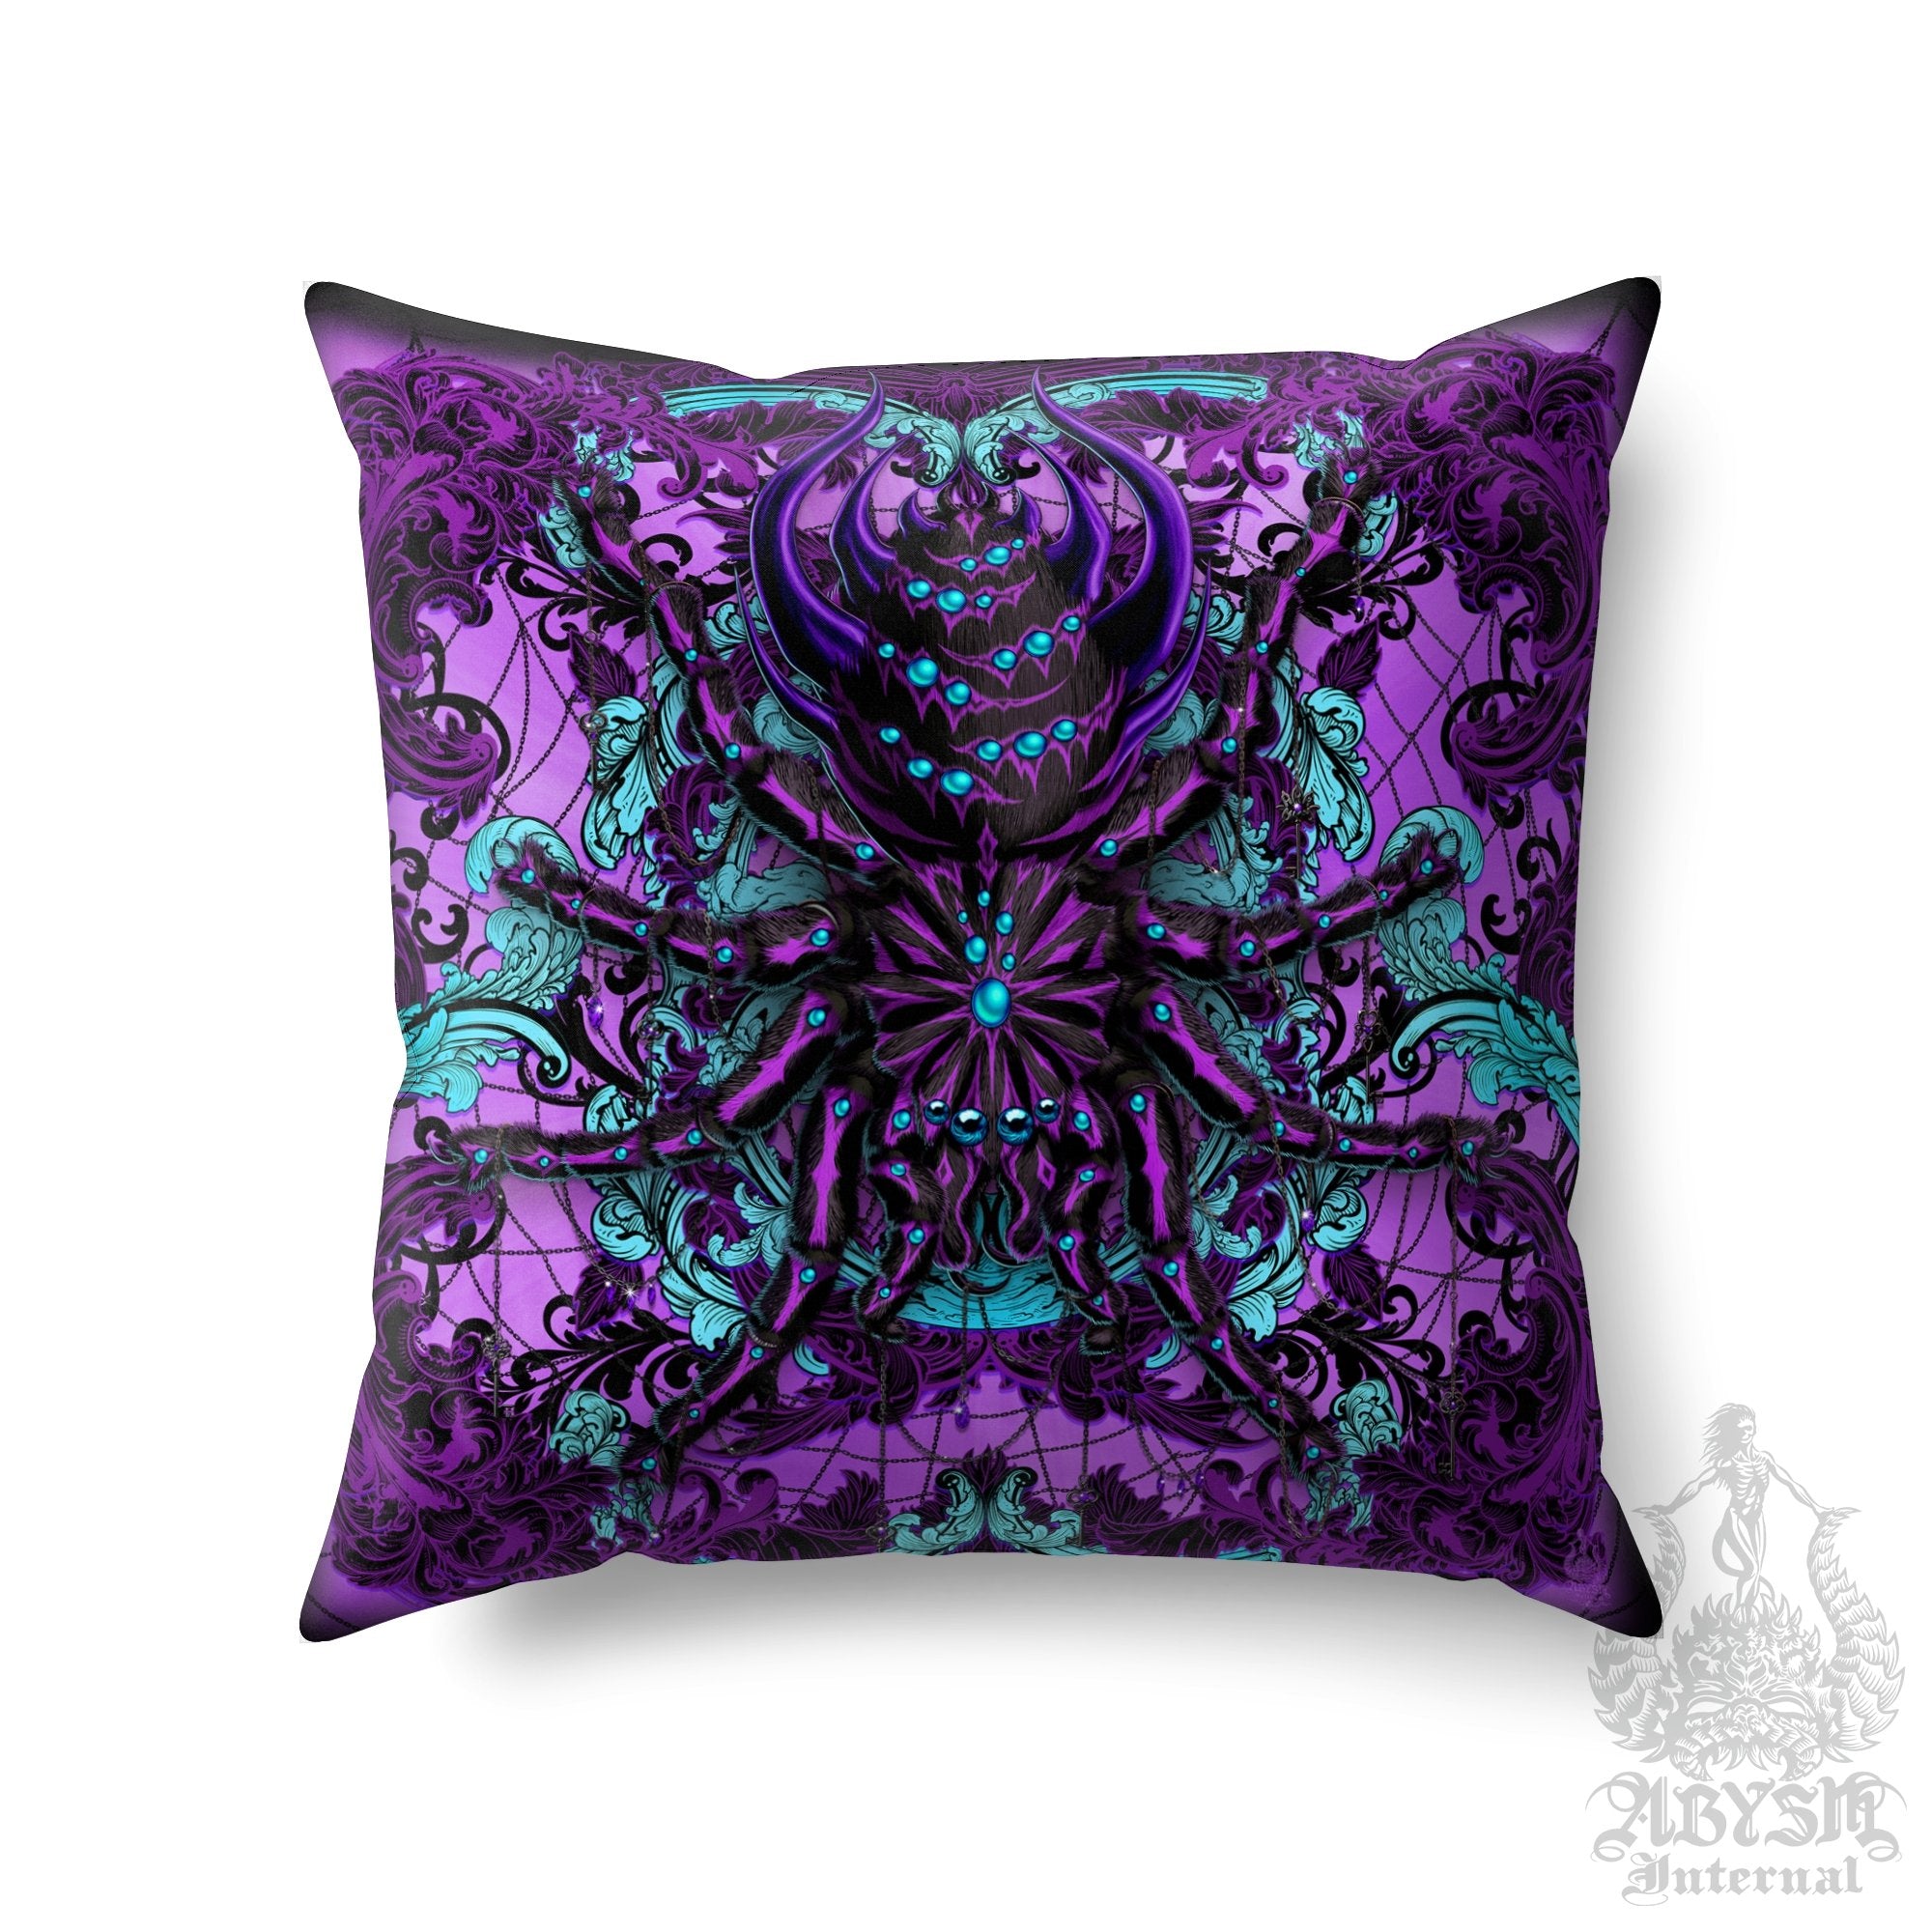 Pastel Goth Throw Pillow, Decorative Accent Pillow, Square Cushion Cover,  Gothic Room Decor, Alternative Home - Tarantula, Spider, Black and Purple